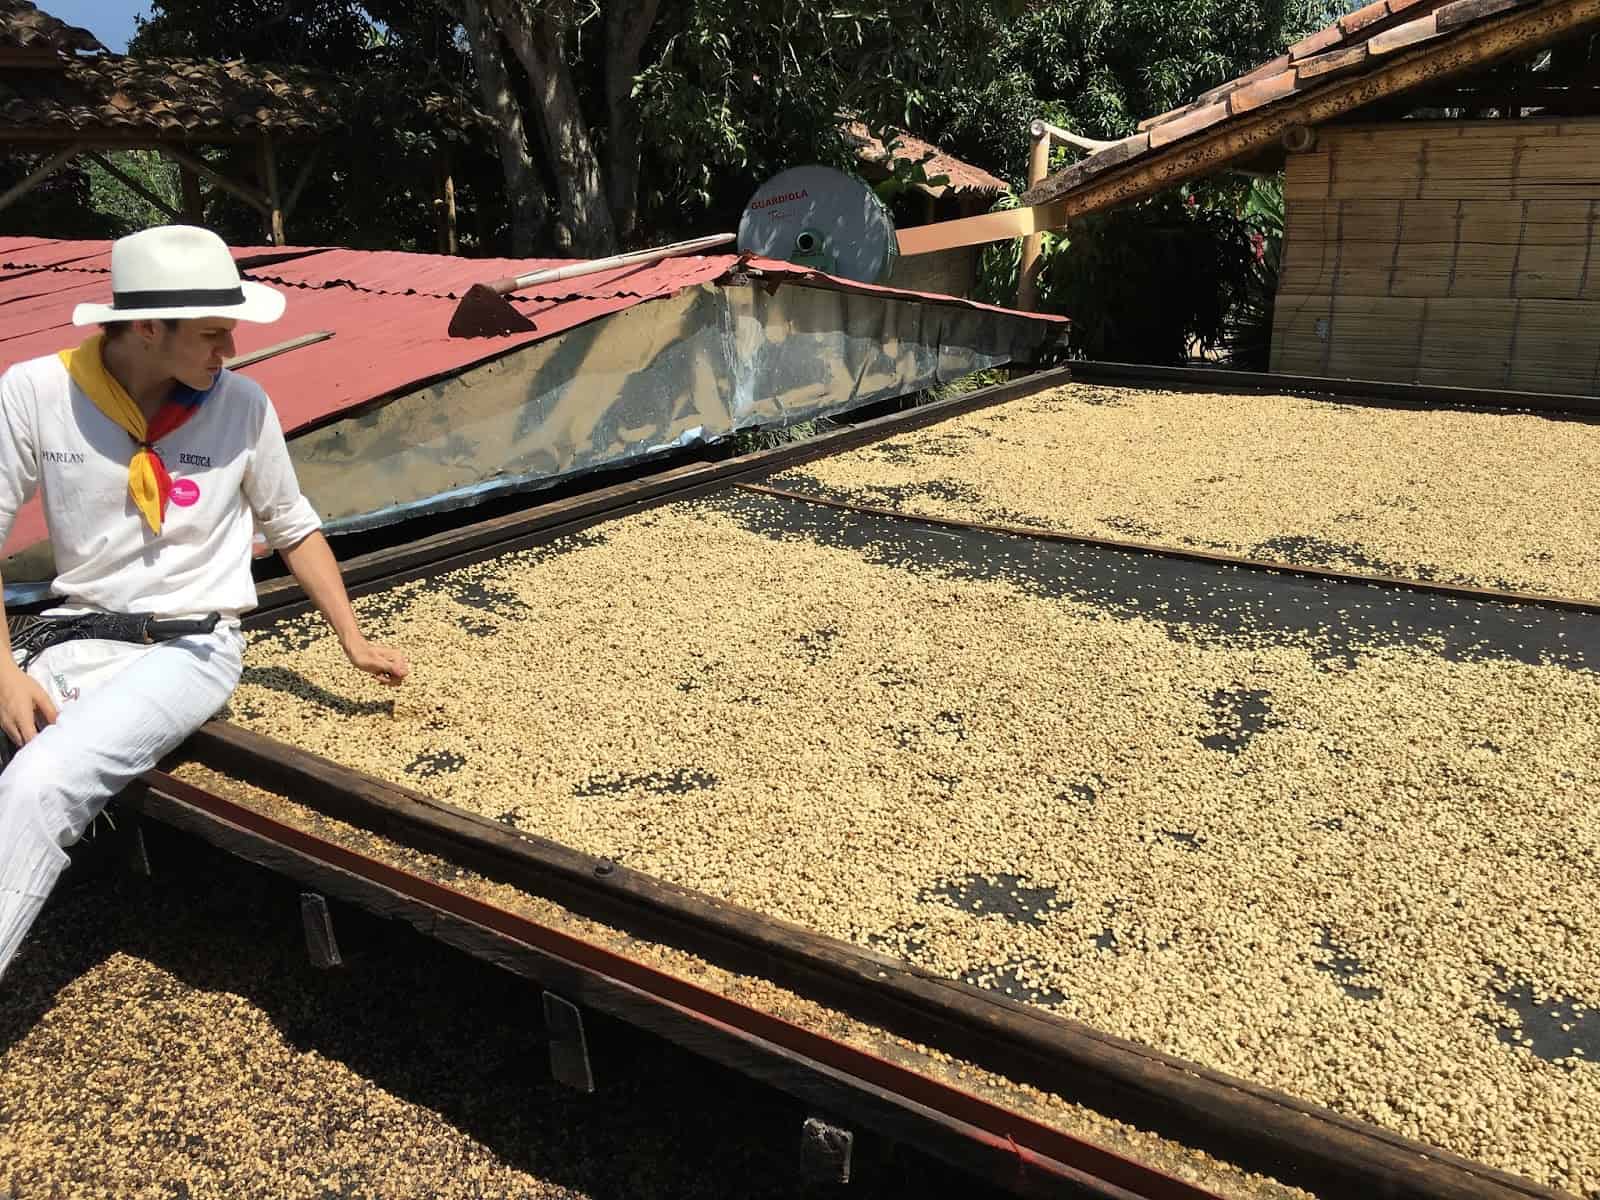 Drying the coffee at Recuca